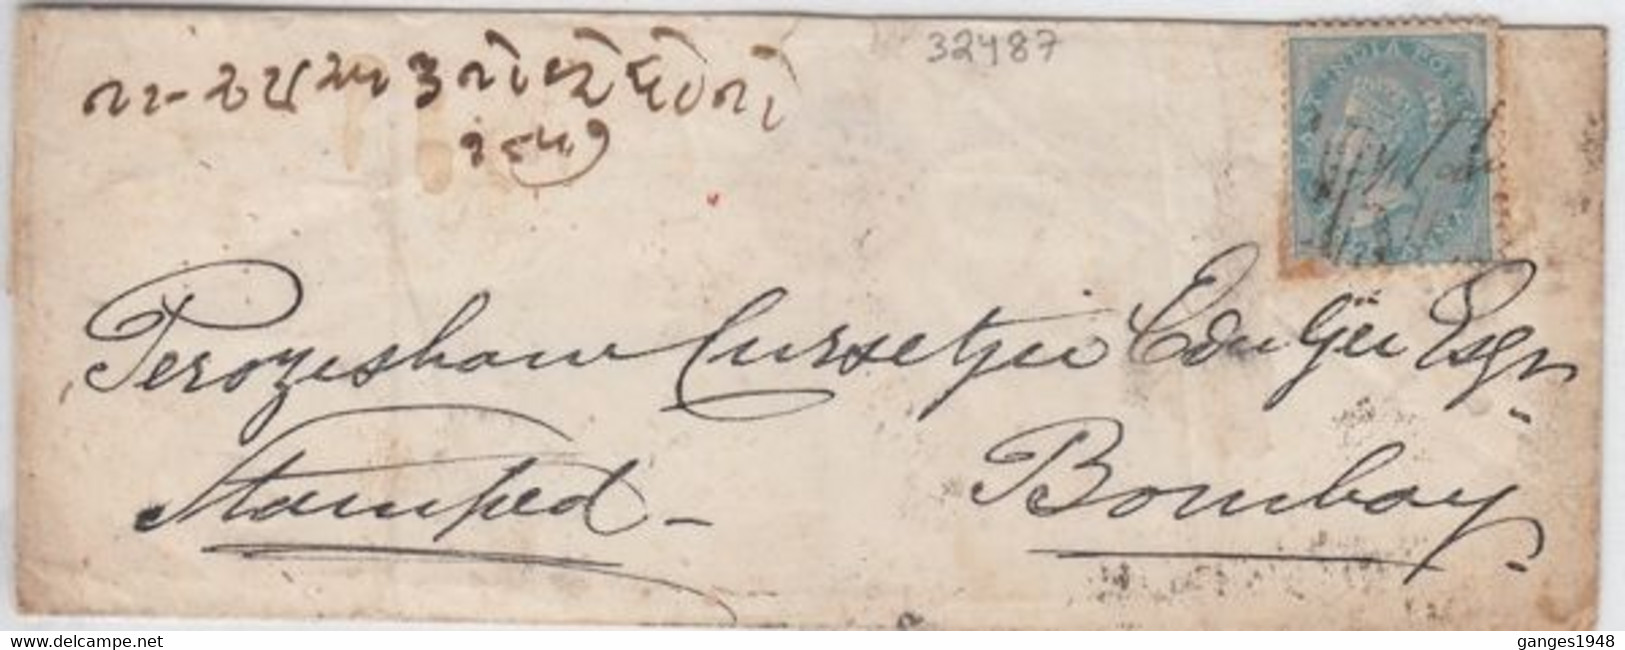 1857 Mutiny Era  QV  1/2A  Franked Cover  Hyderabad To Bombay  #  26229 D  Inde  Indien - 1854 East India Company Administration